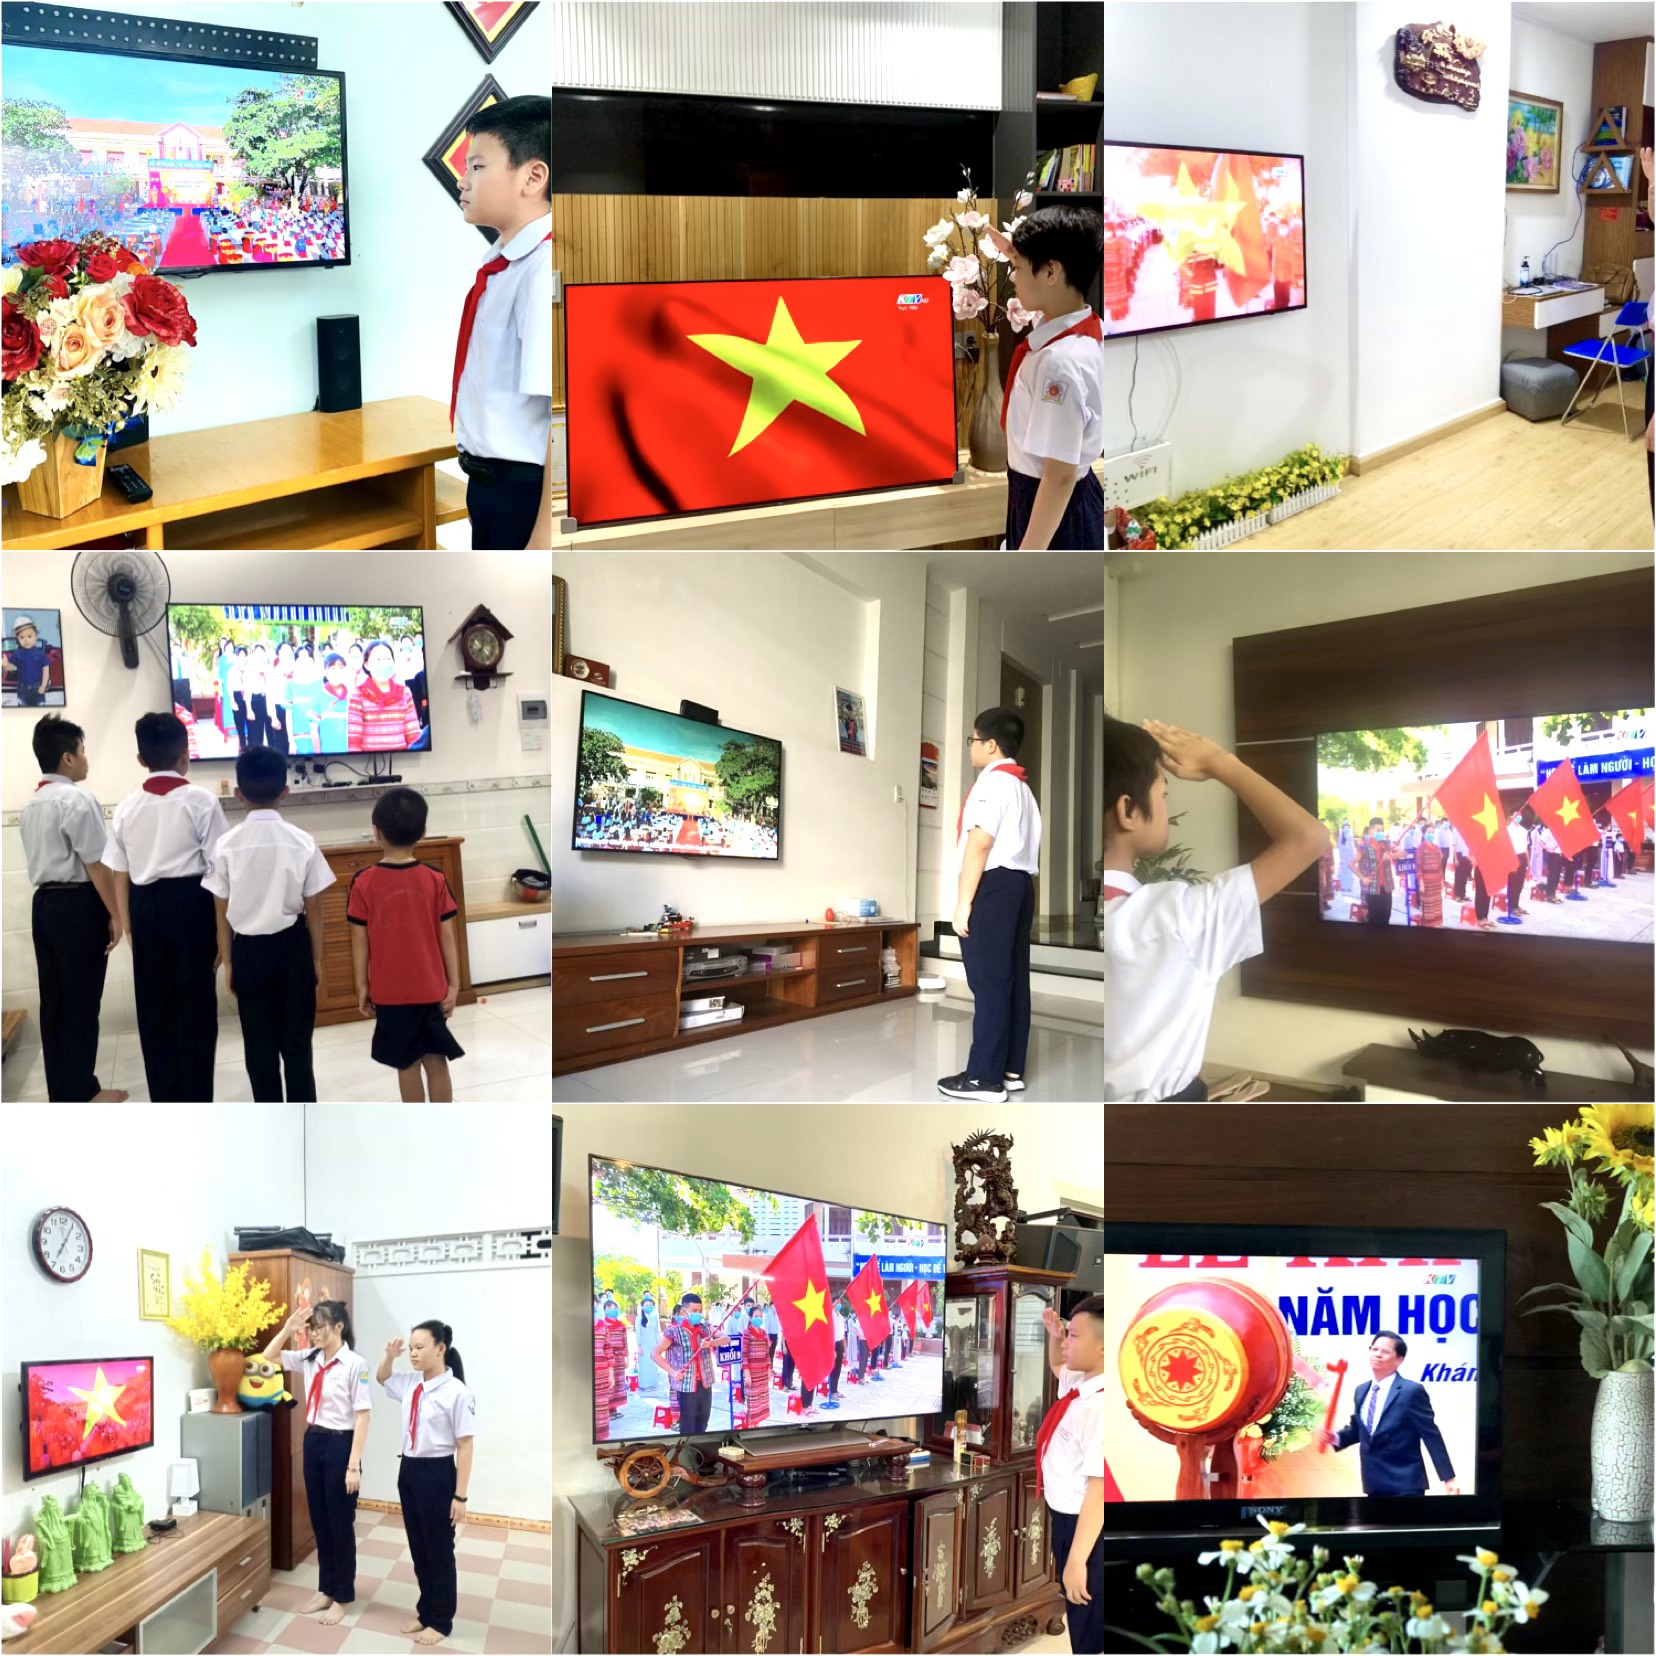 Students of Nguyen Hien Junior High School attending opening ceremony via television (Photo: Hong Minh)